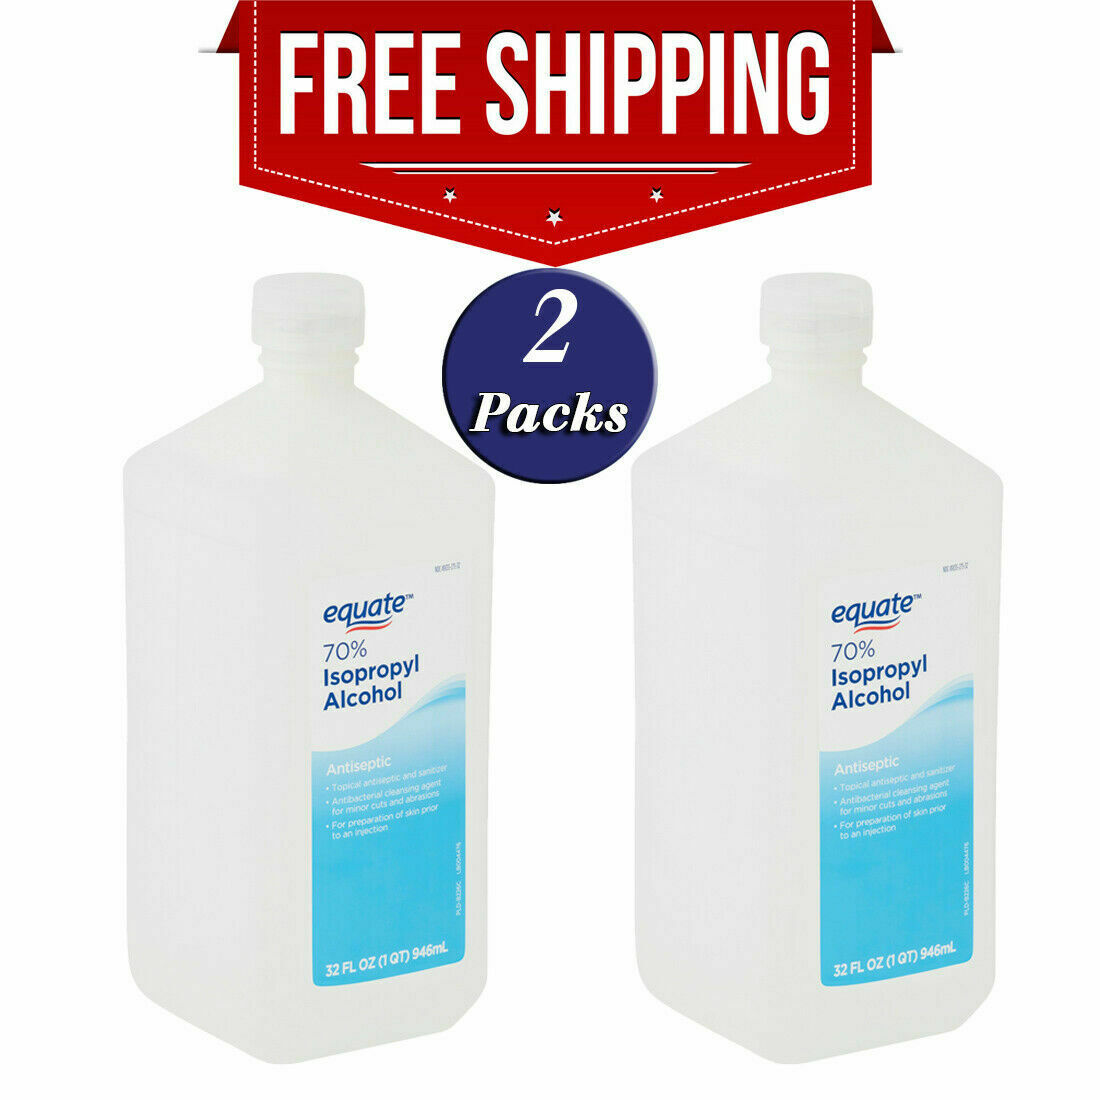 2 Pack Antiseptic Equate 70% Isopropyl Alcohol Antibacterial First Aid 32 Fl Oz